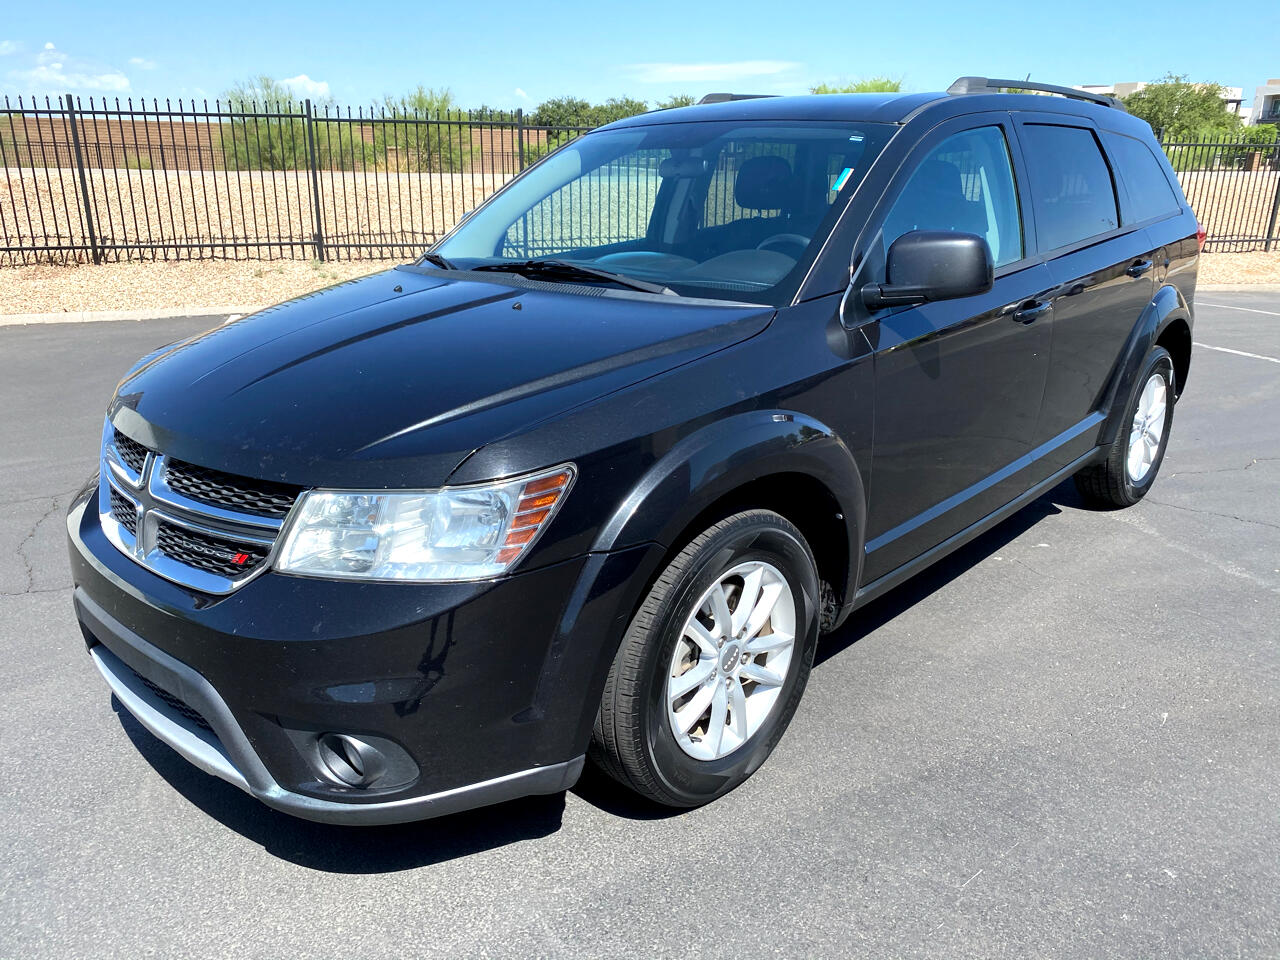 Used 2013 Dodge Journey AWD 4dr SXT for Sale in Chandler AZ 85286